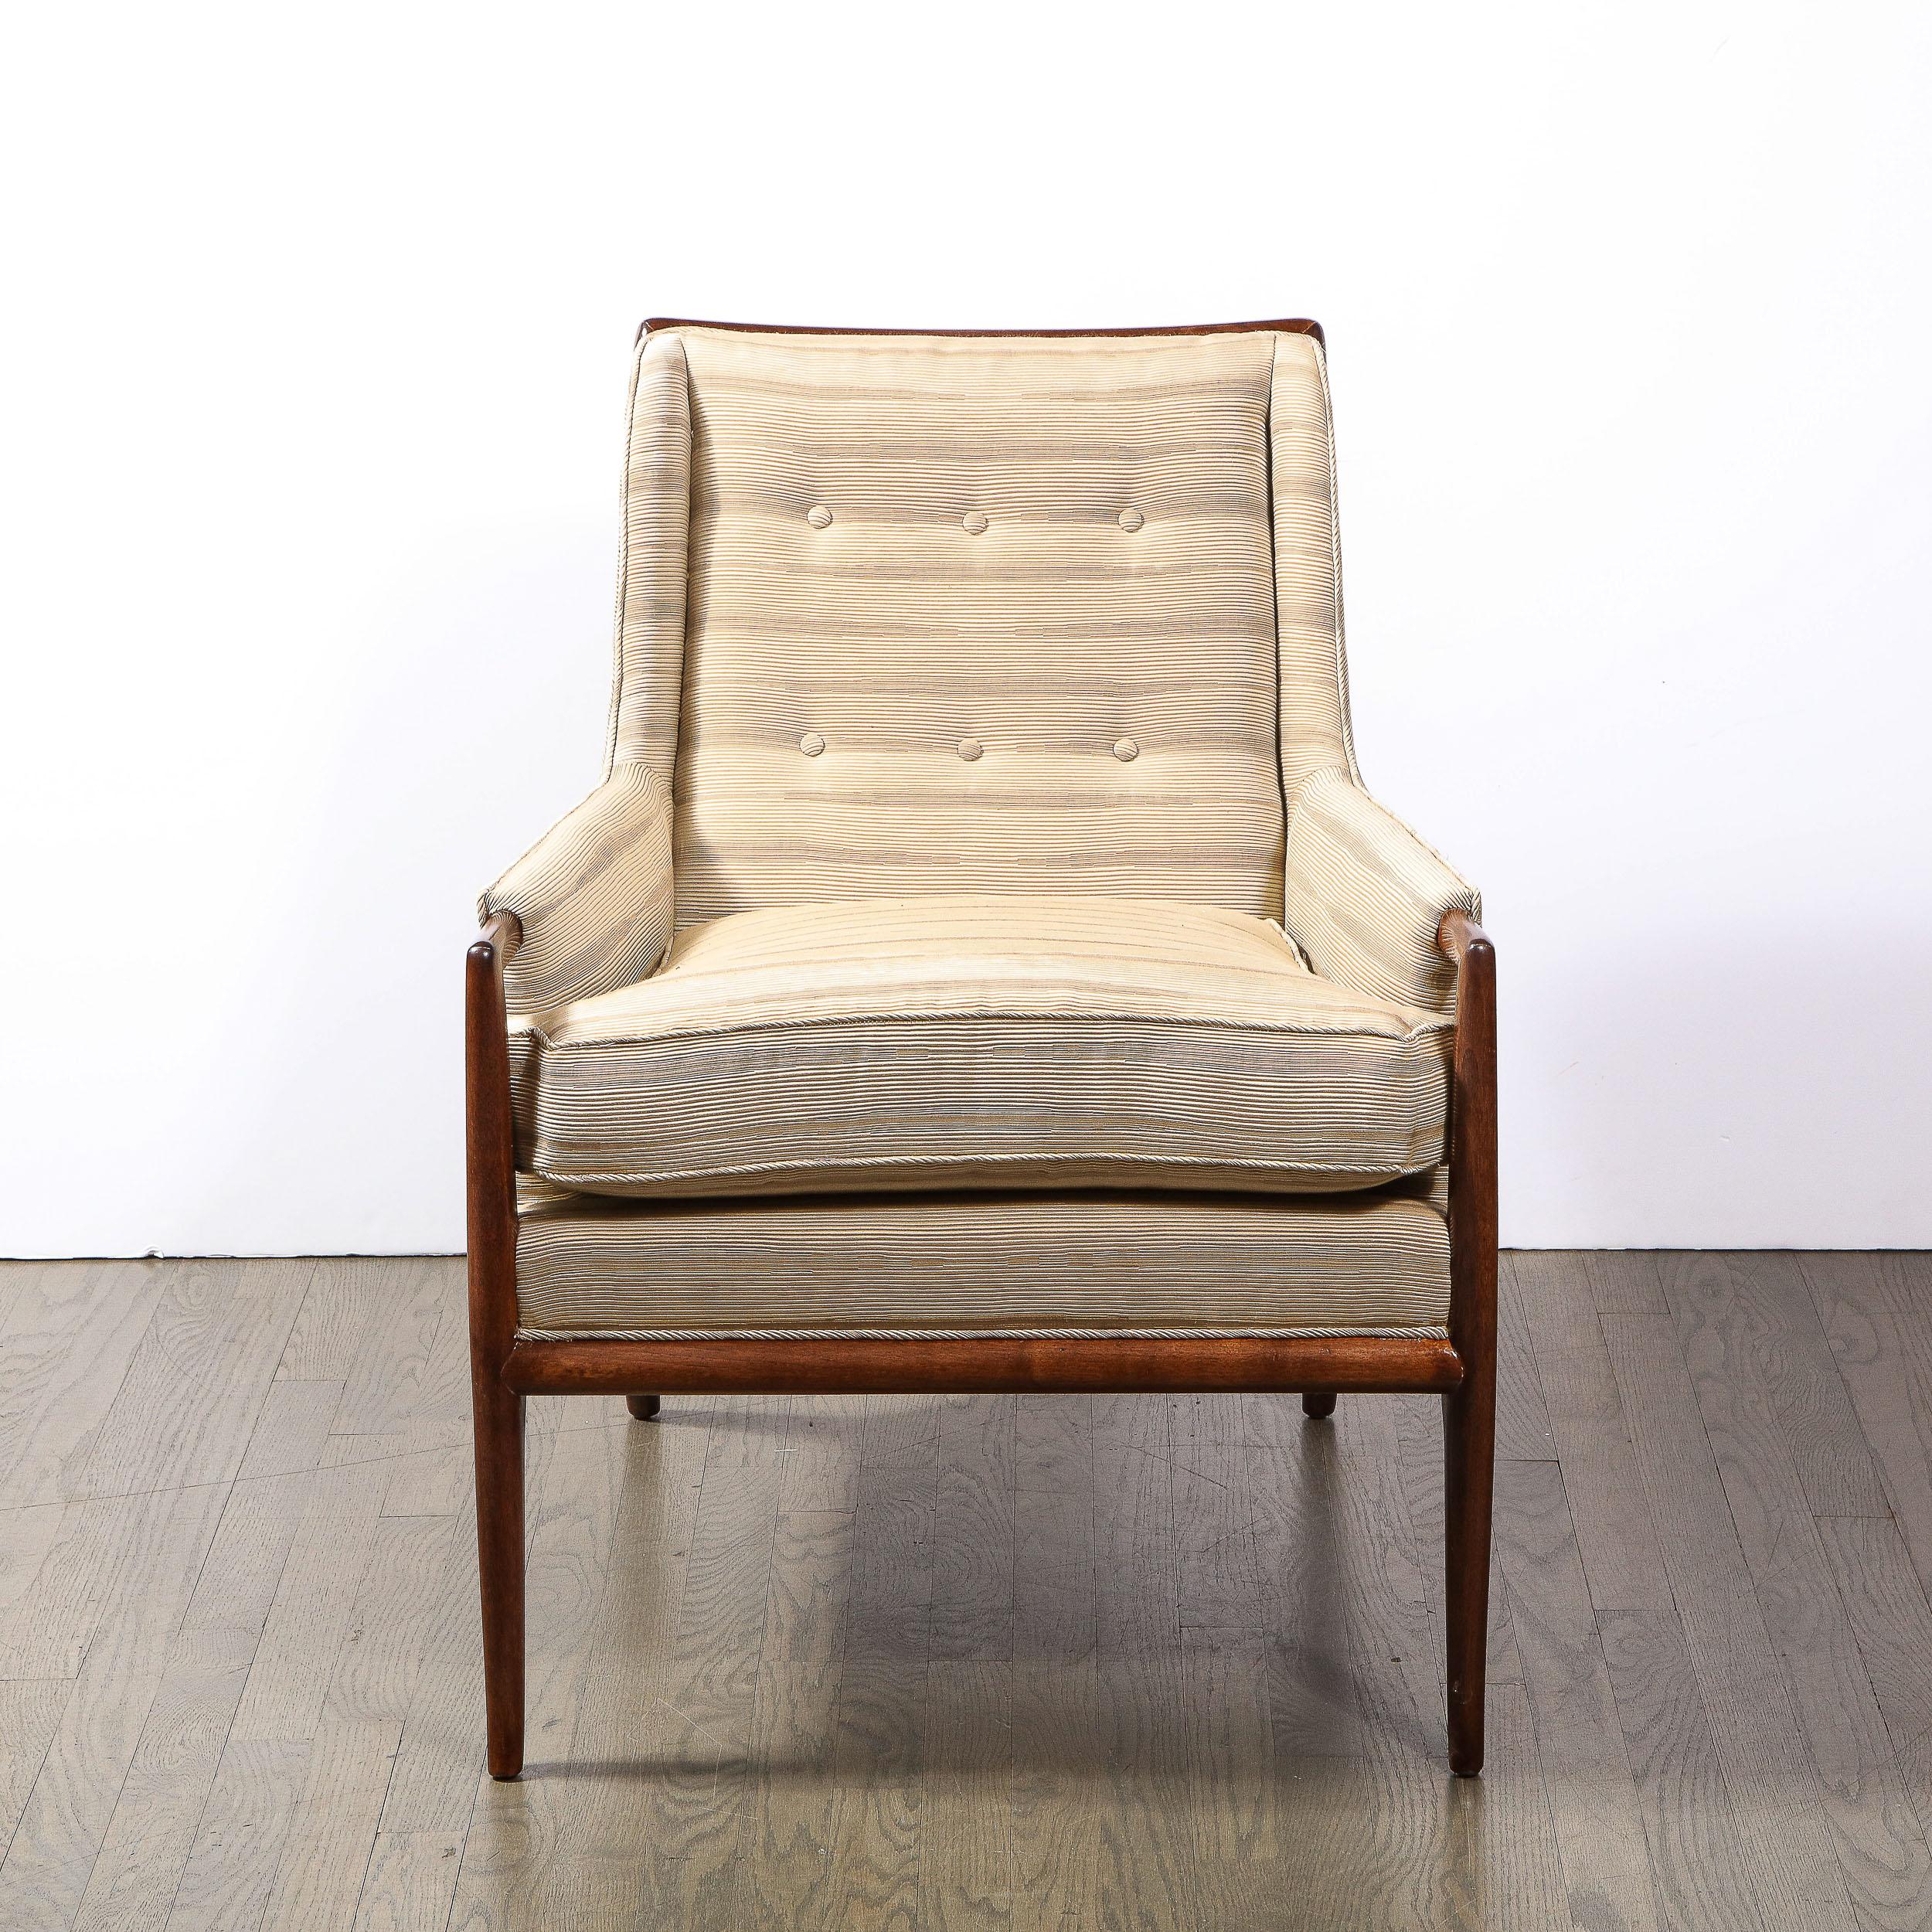 This effortlessly elegant and timeless Mid Century Modern chair was realized by the legendary designer T.H. Robsjohn-Gibbings in the United States circa 1950. Gibbings was renowned for assimilating classical influences into silhouettes that were